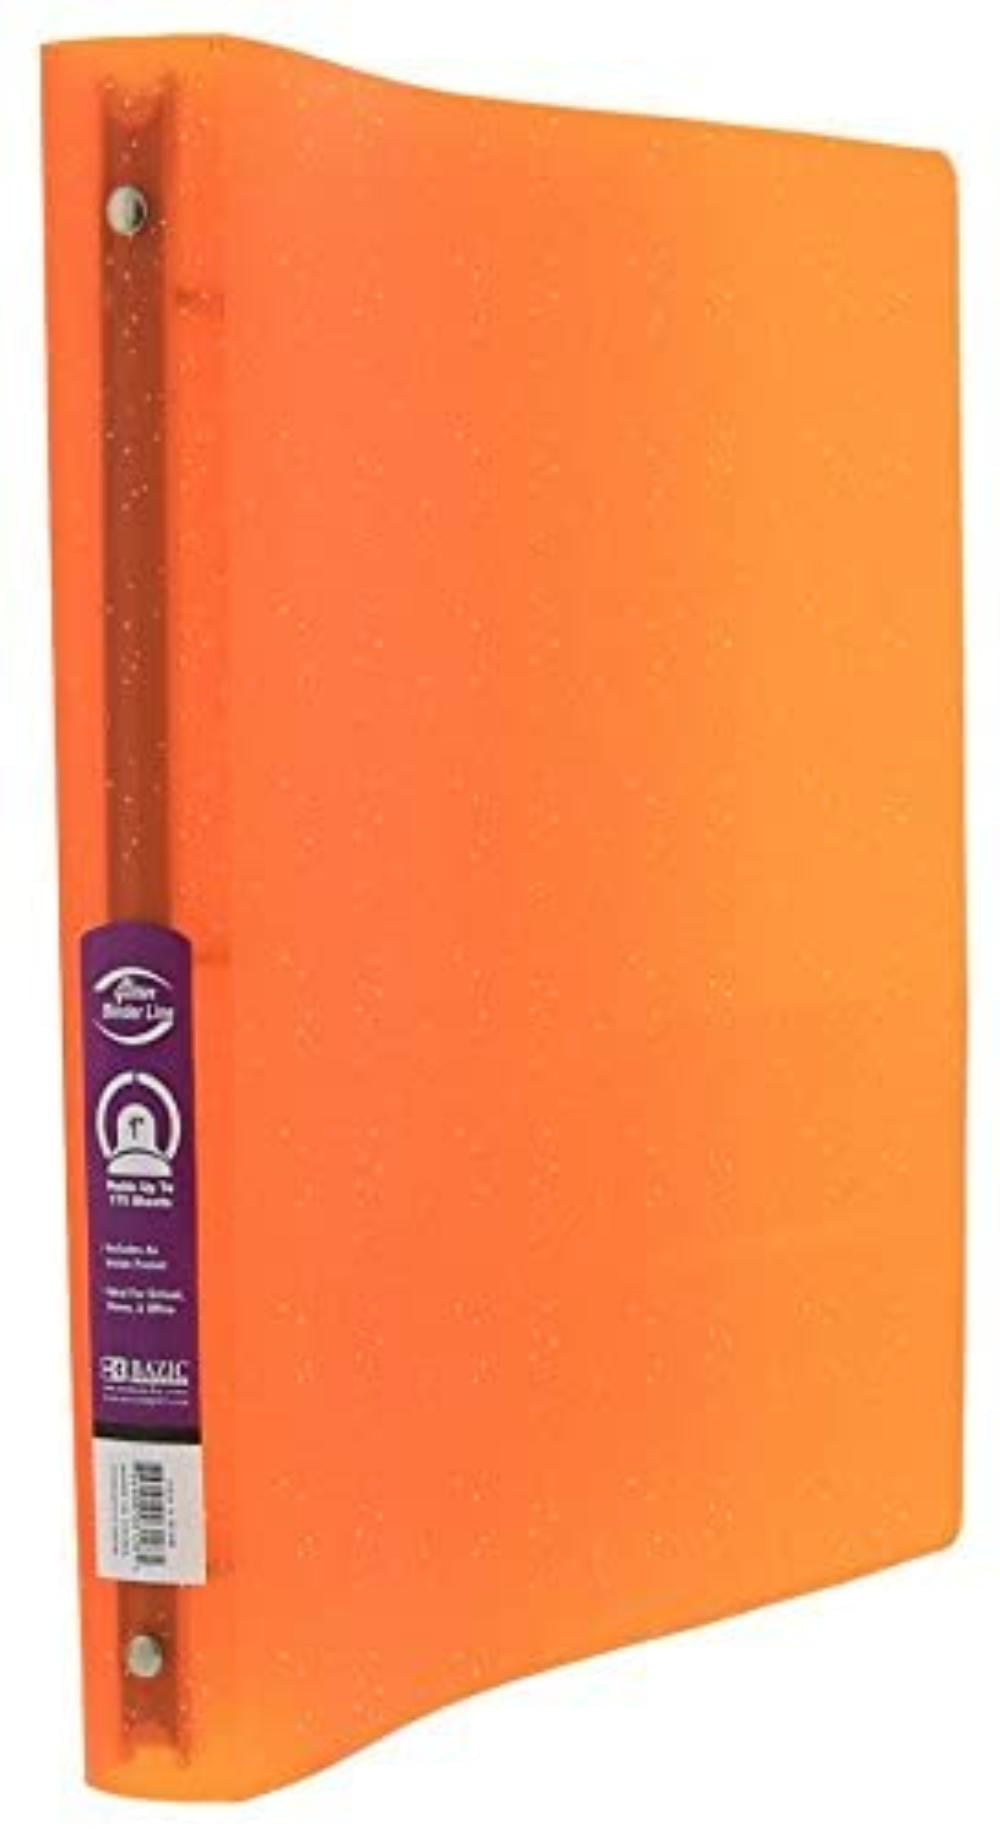 3128-48 BAZIC 1 Glitter Poly 3-Ring Binder w/Pocket for School Case of 48 or Office Home 